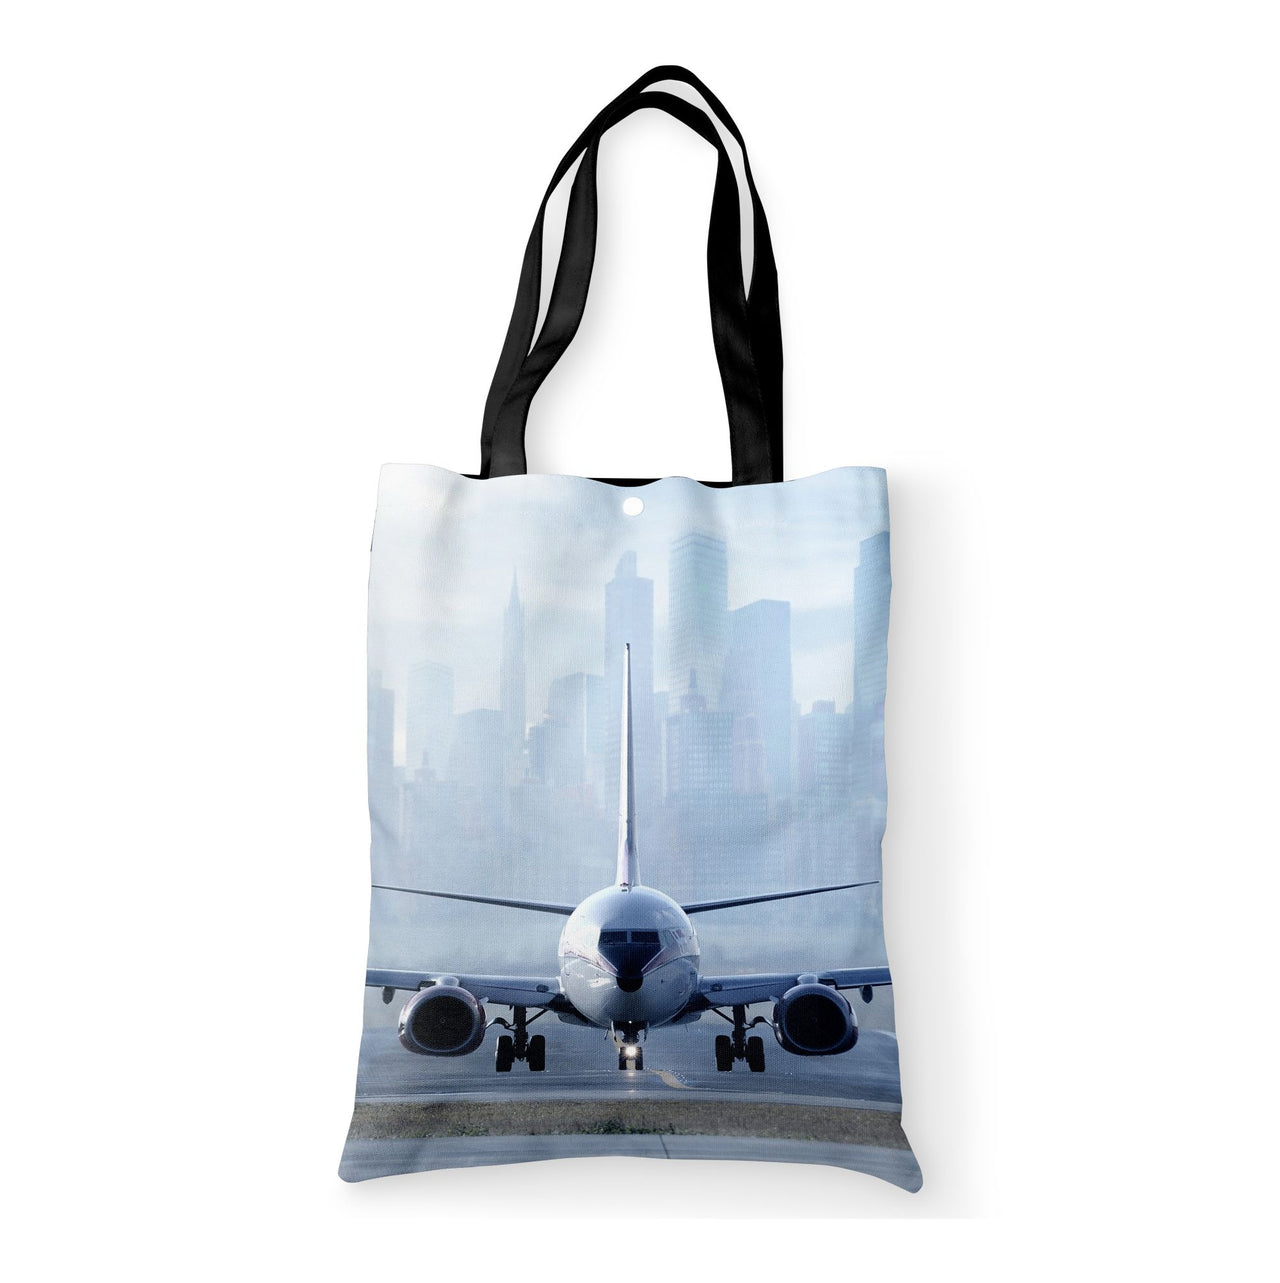 Boeing 737 & City View Behind Designed Tote Bags